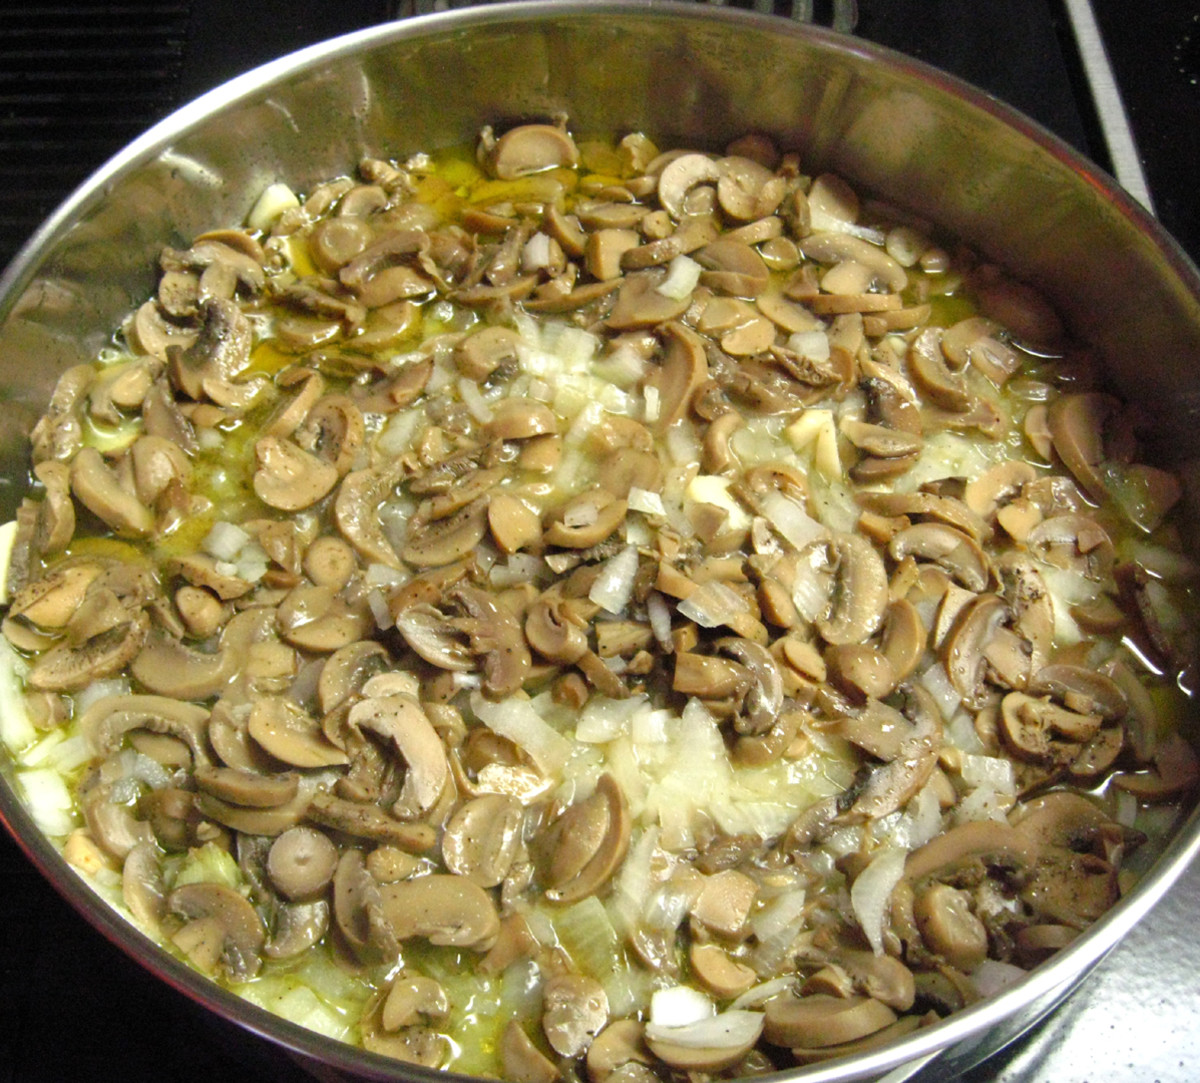 Saute' mushrooms, onions, and garlic in extra virgin olive oil. Simmer for about eight minutes.